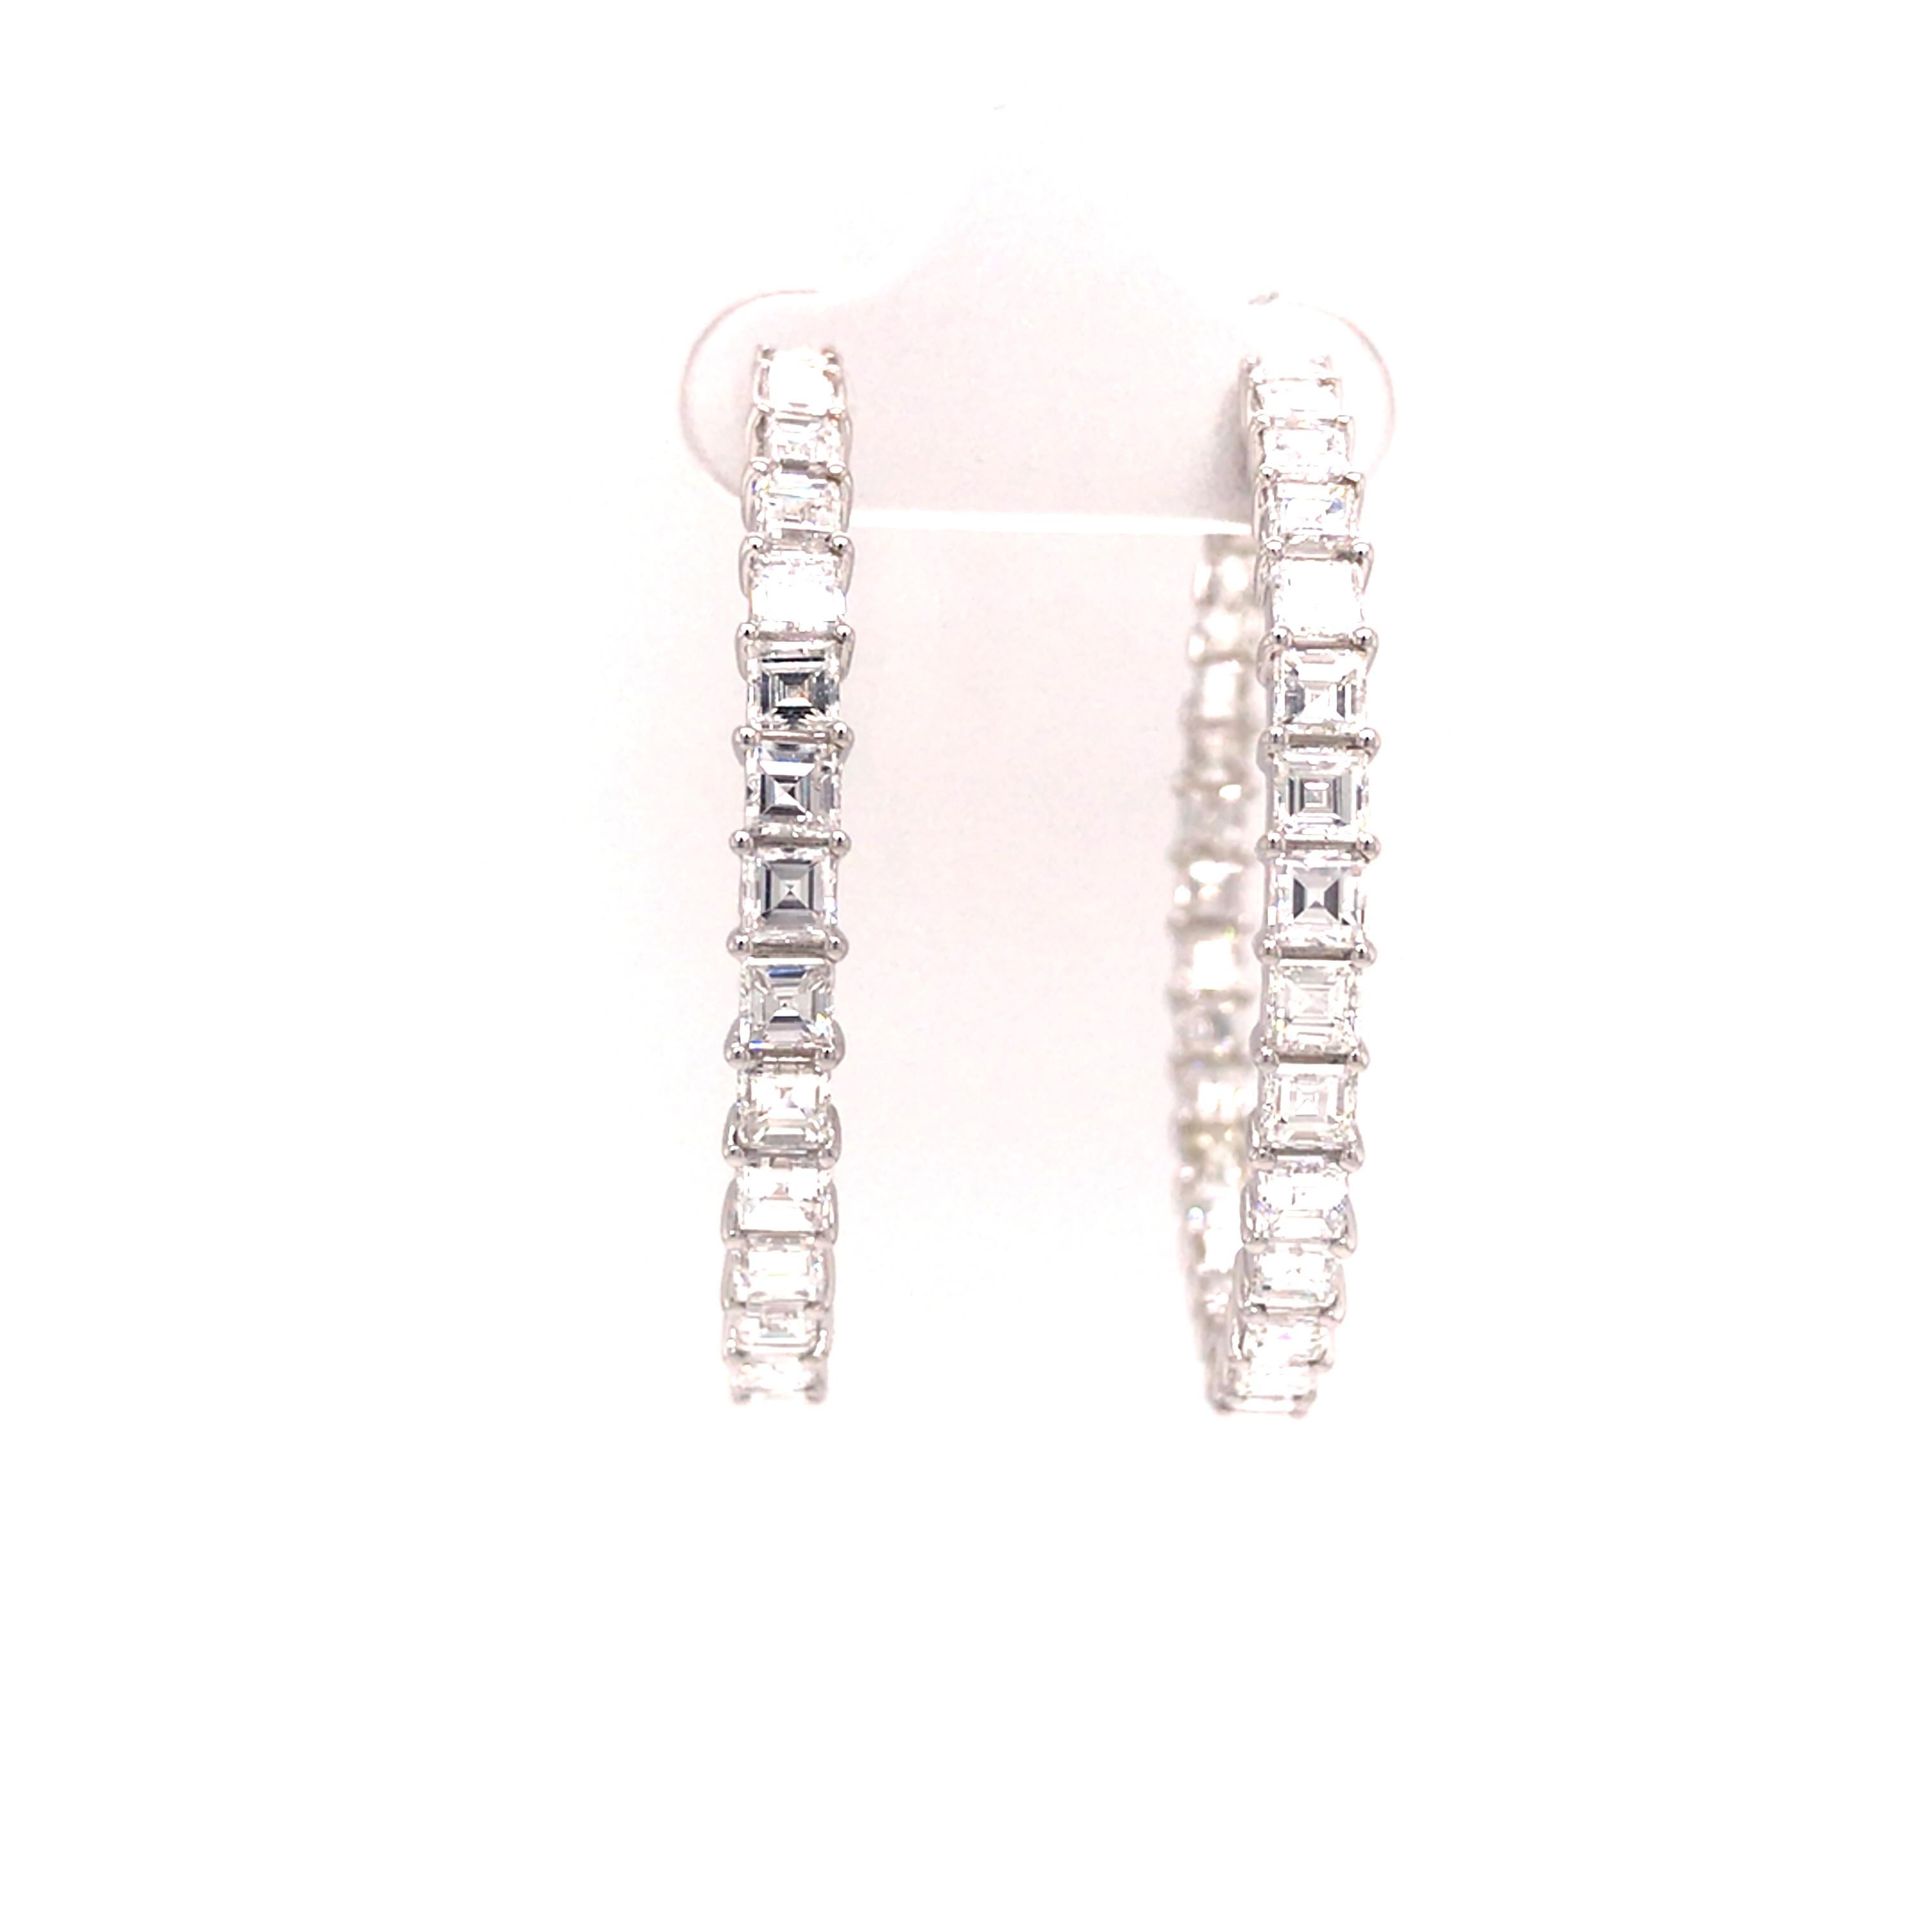 Emerald Diamond 1 1/2 inch In/Out Hoop Earrings in 18K White Gold.  (58) Emerald Cut Diamonds weighing 6.80 carat total weight, G-H in color and VS-SI in clarity are expertly set.  The Earrings measure 1 1/2 inch in length and 1/8 inch in width.